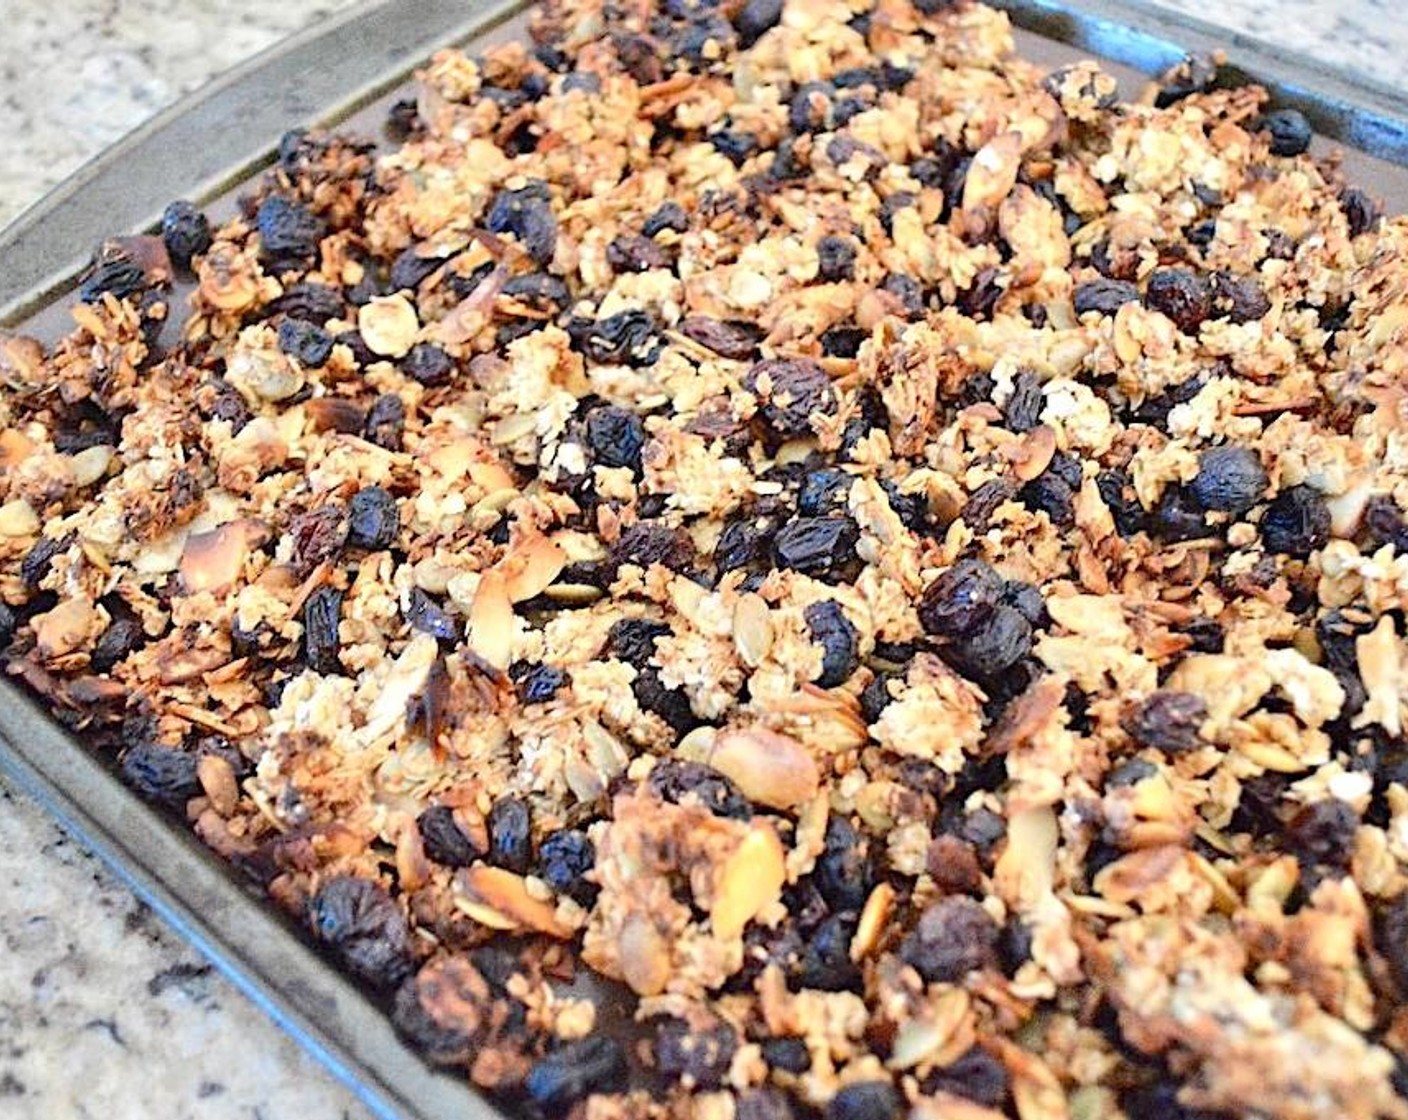 step 3 Bake the granola for 30 minutes in preheated oven, then turn the oven off and break it all up and stir it. Put it back into the still-warm oven for 2 hours to dry out completely.